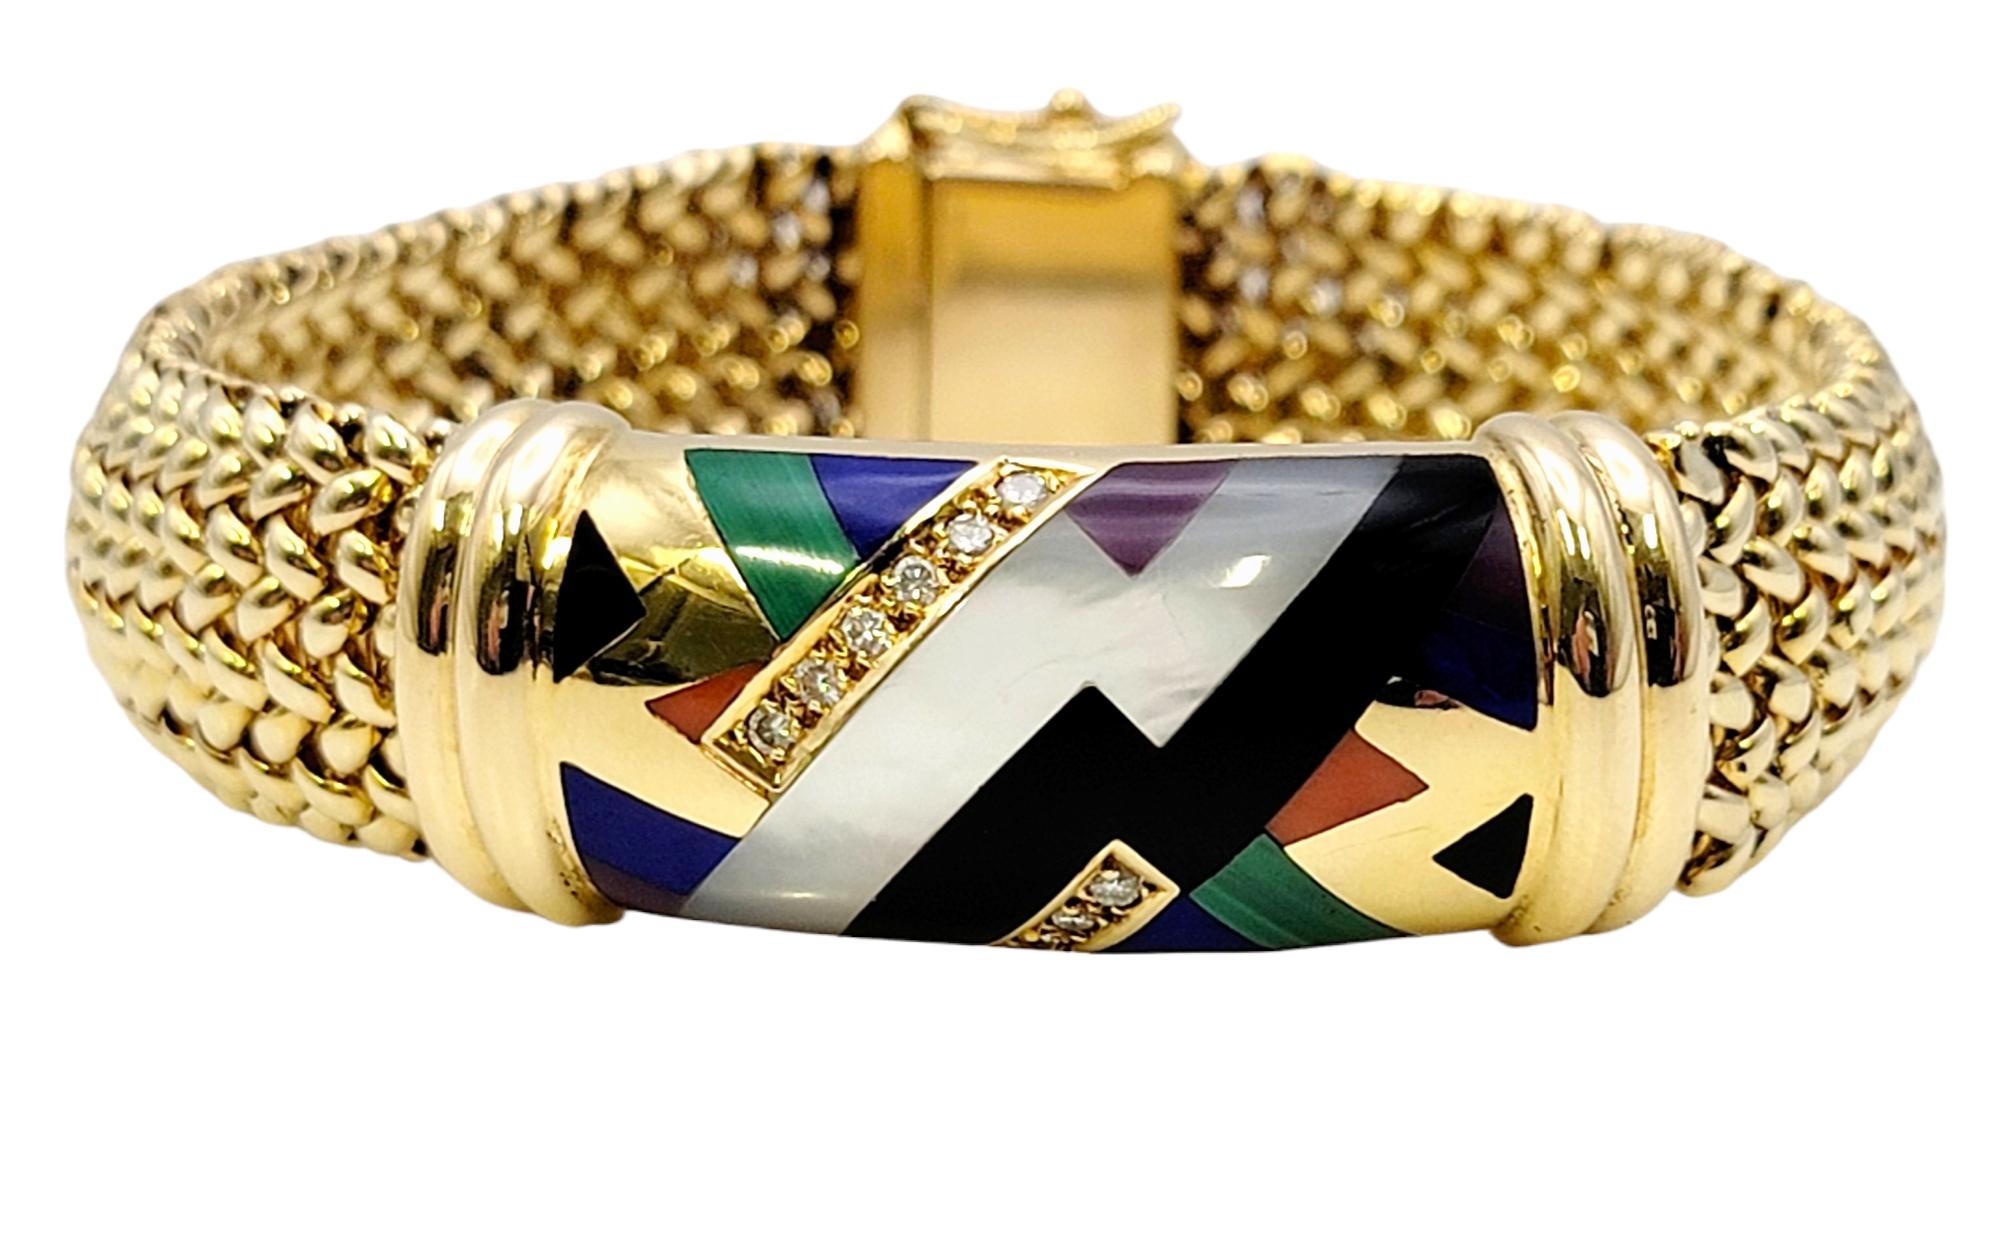 Adorn your wrist in vibrant modern art! This gorgeous diamond and gemstone mosaic bracelet from esteemed jewelry designer, Asch Grossbardt is sure to make a bold statement.  This stunning designer bracelet features a flexible, wide mesh bracelet in